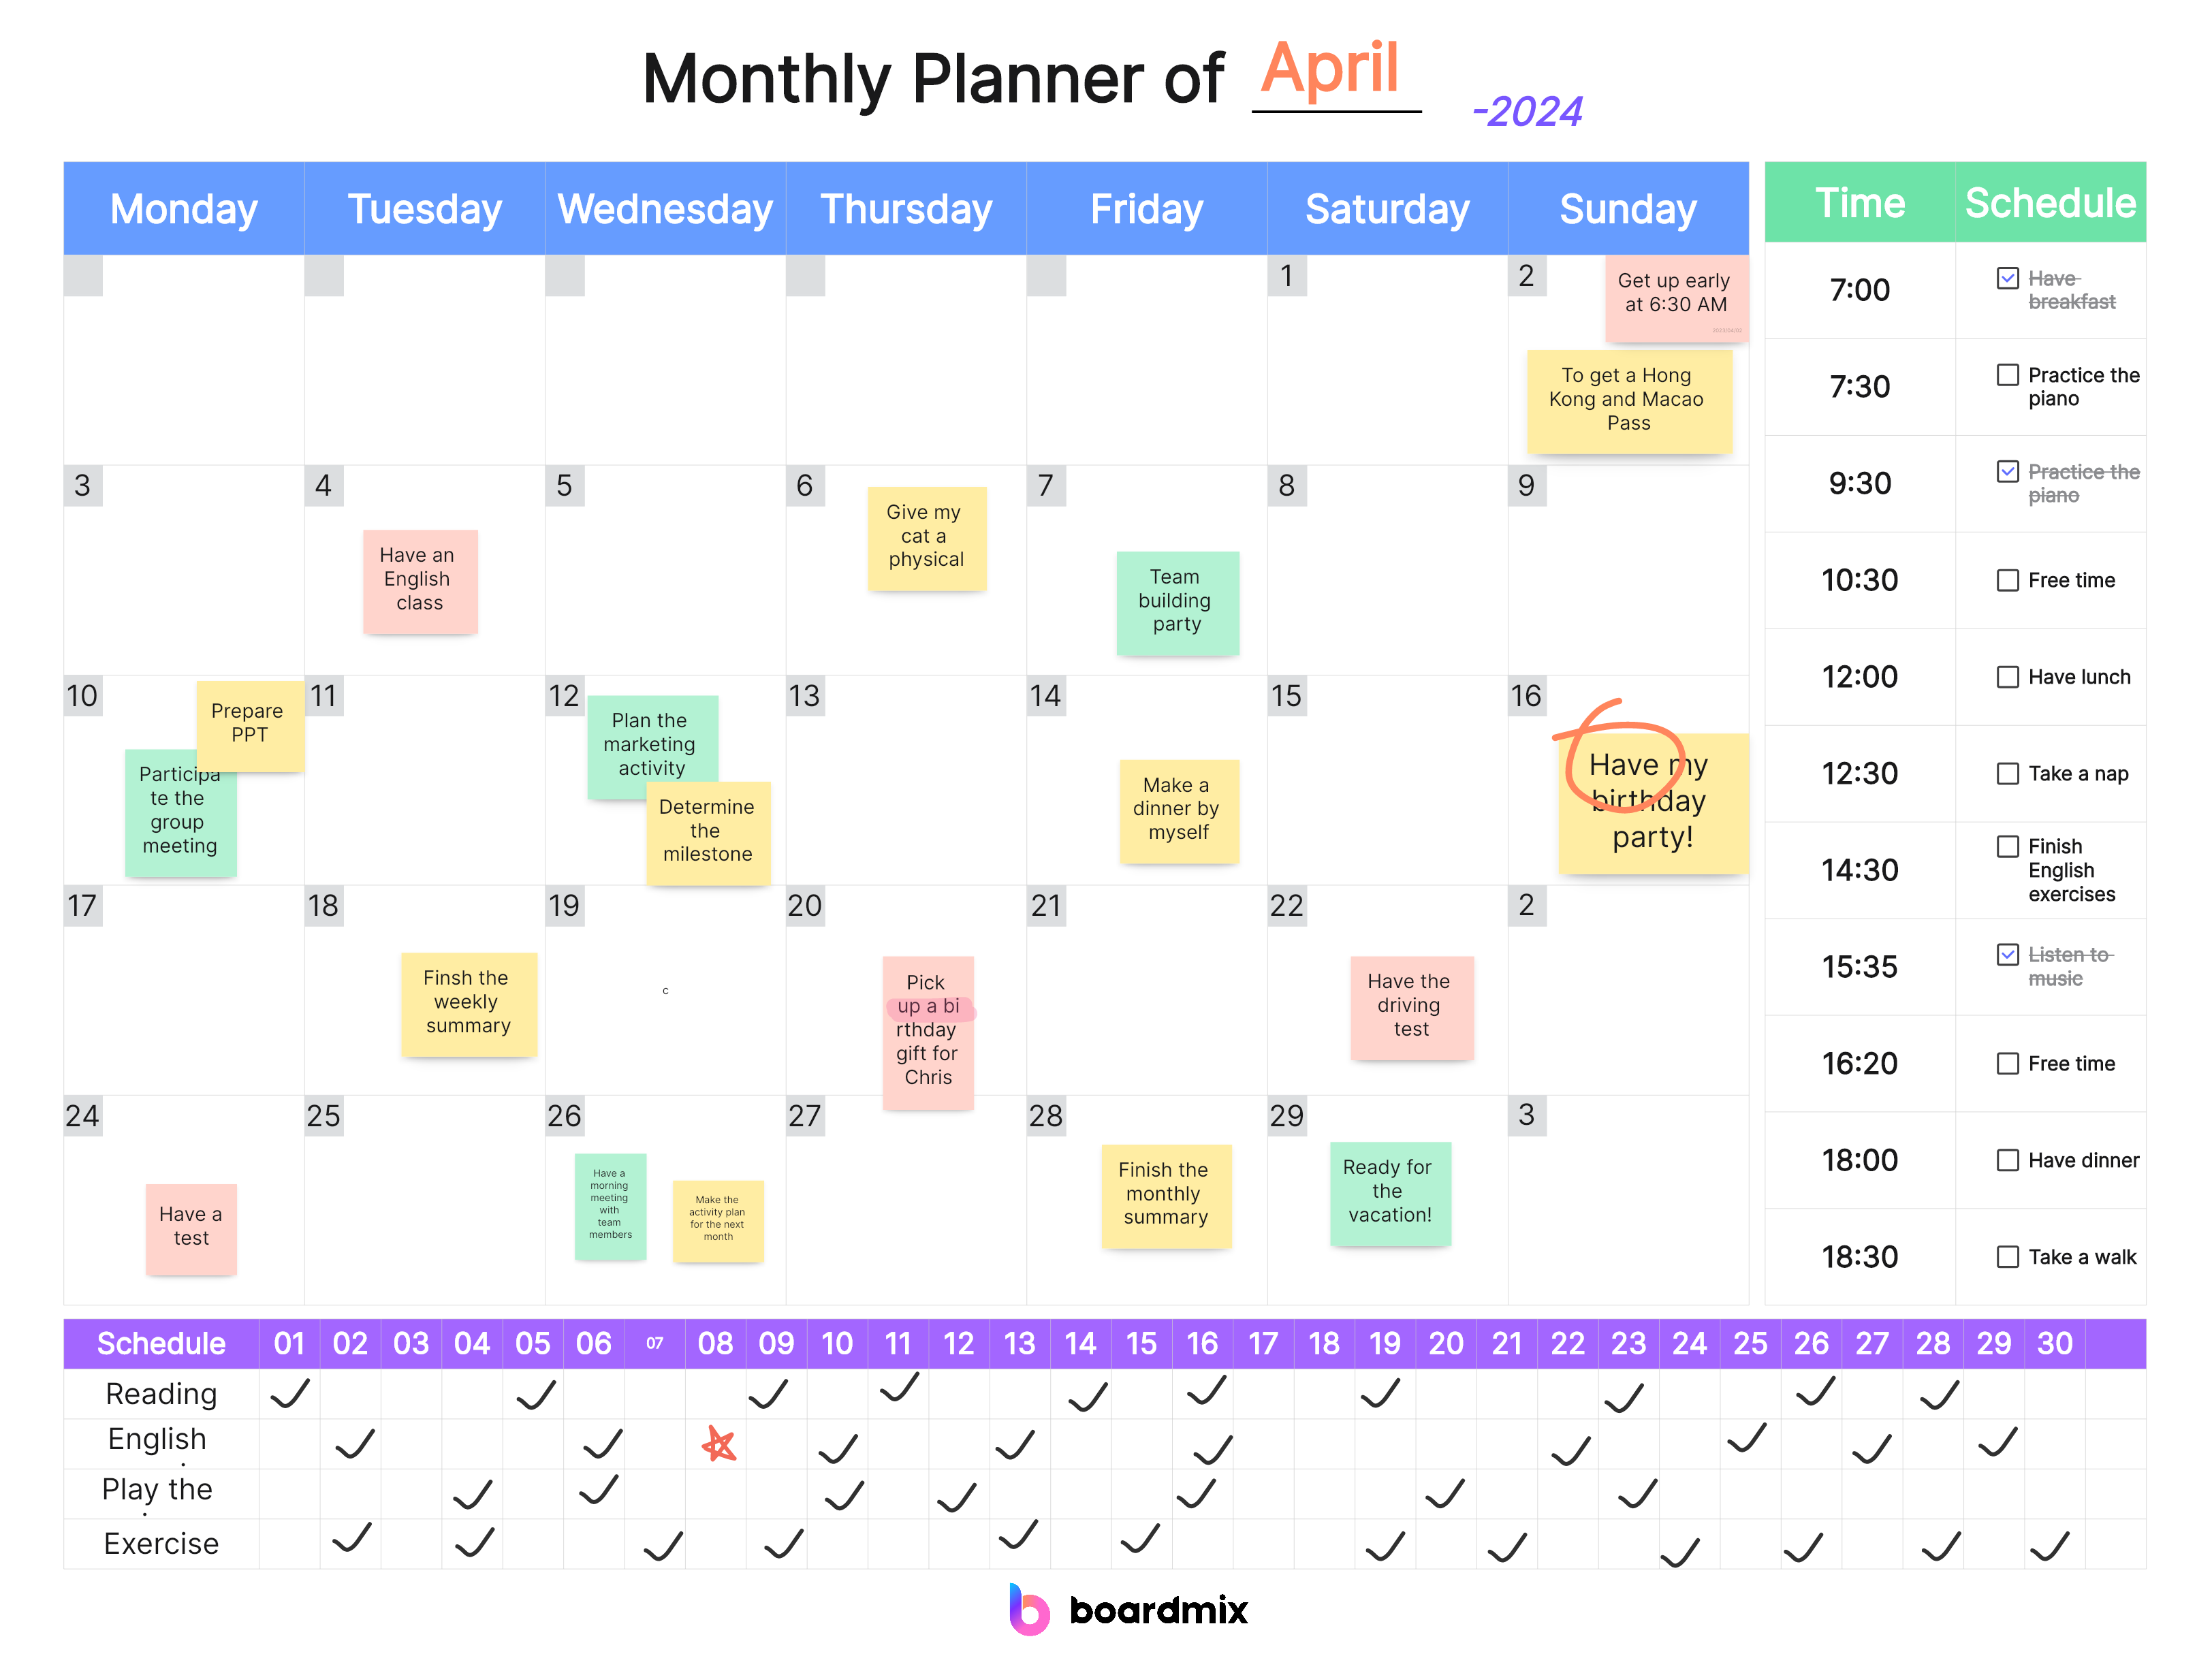 customize-your-monthly-planner-for-2024-online.png